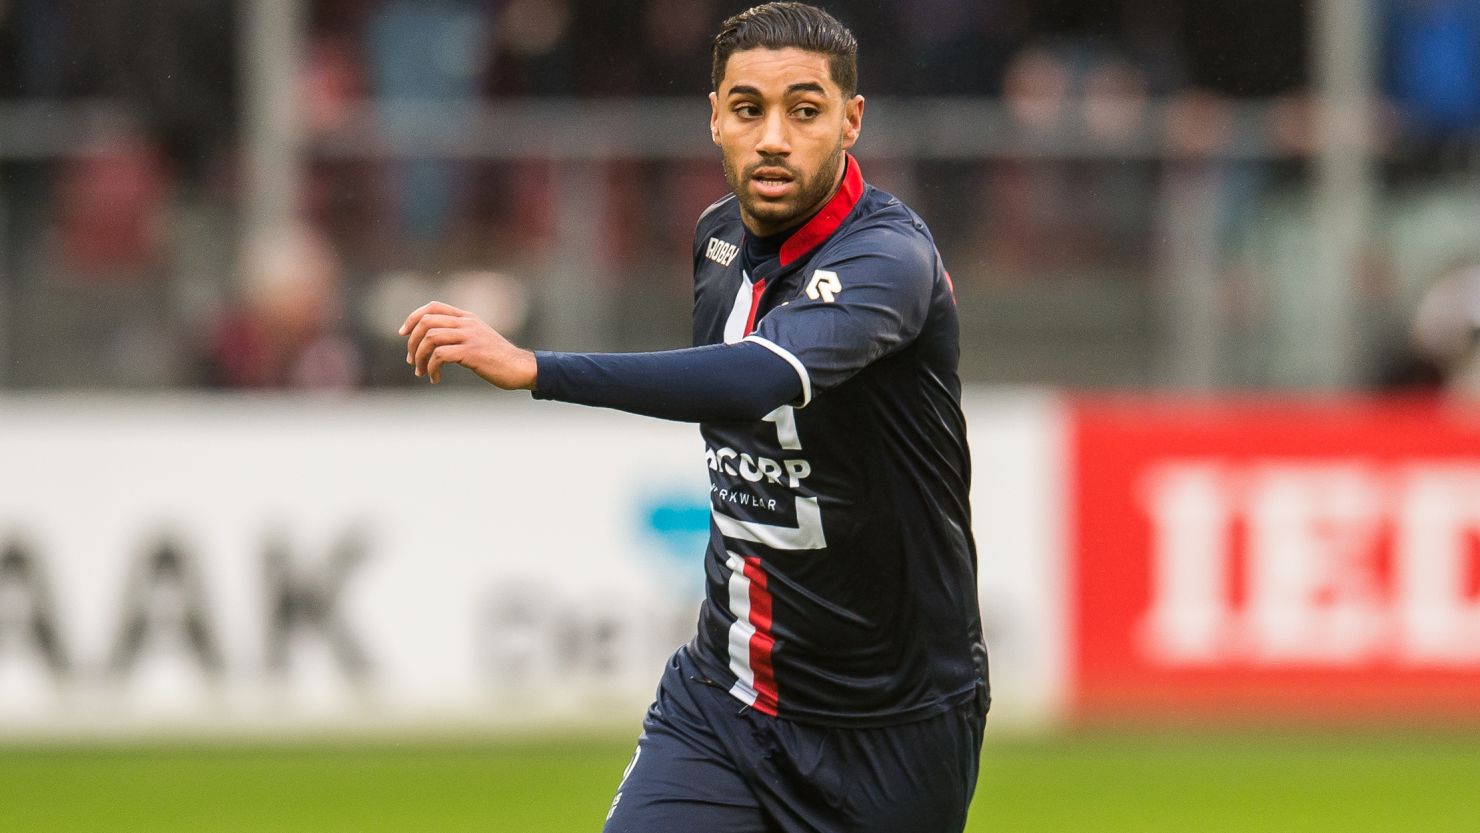 Anouar Kali of Willem II was sent off on the intervention of the video referee in a KNVB Cup match at Ajax.